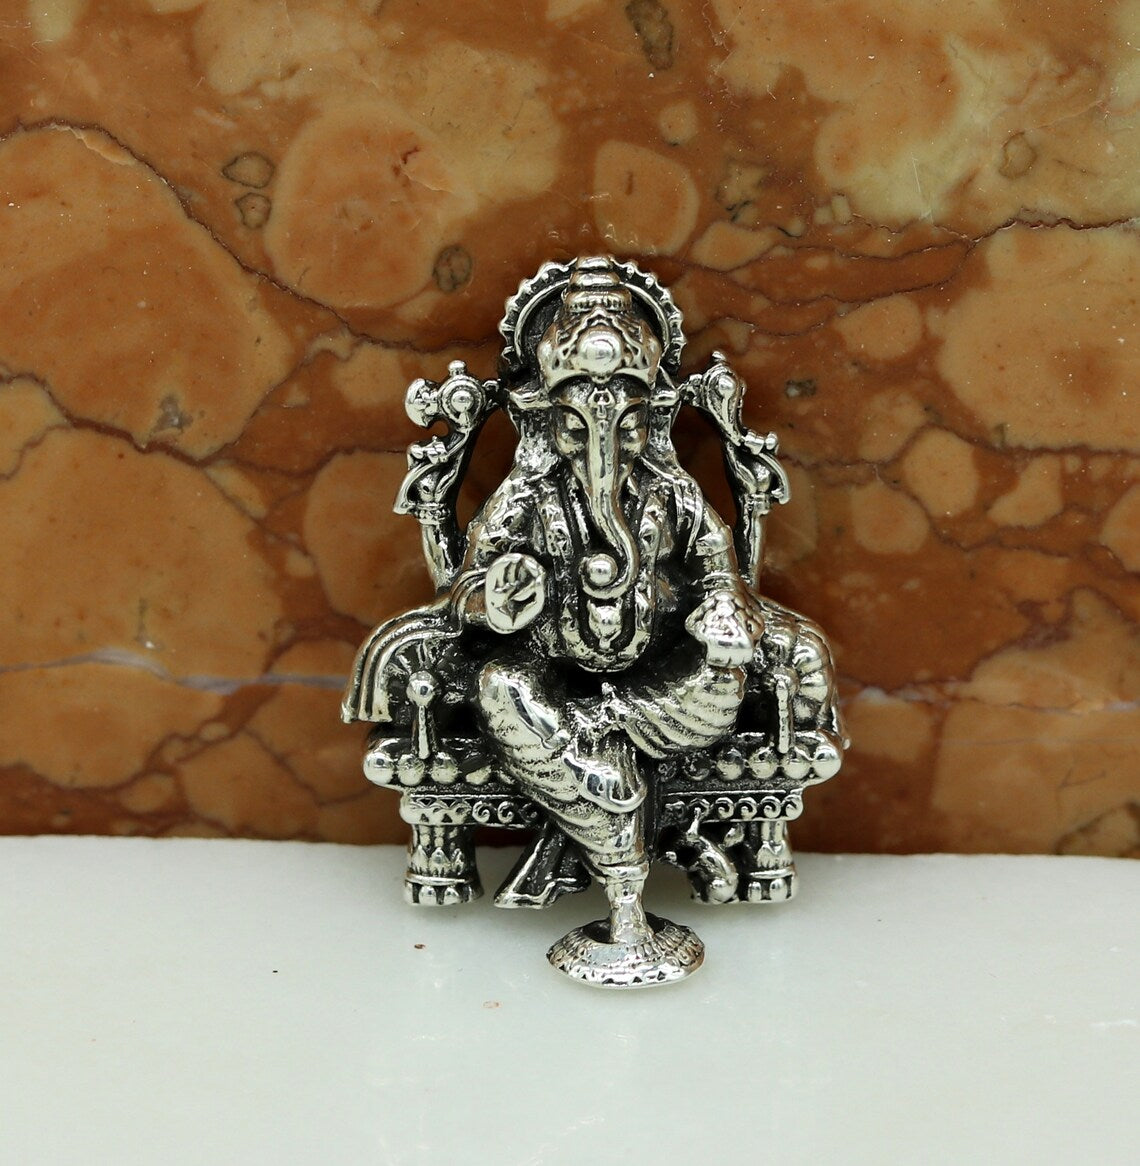 925 Sterling silver Lord Ganesh Idol, Pooja Articles, Indian Silver Idols, handcrafted Lord Ganesh statue sculpture Diwali puja gift su02 - TRIBAL ORNAMENTS